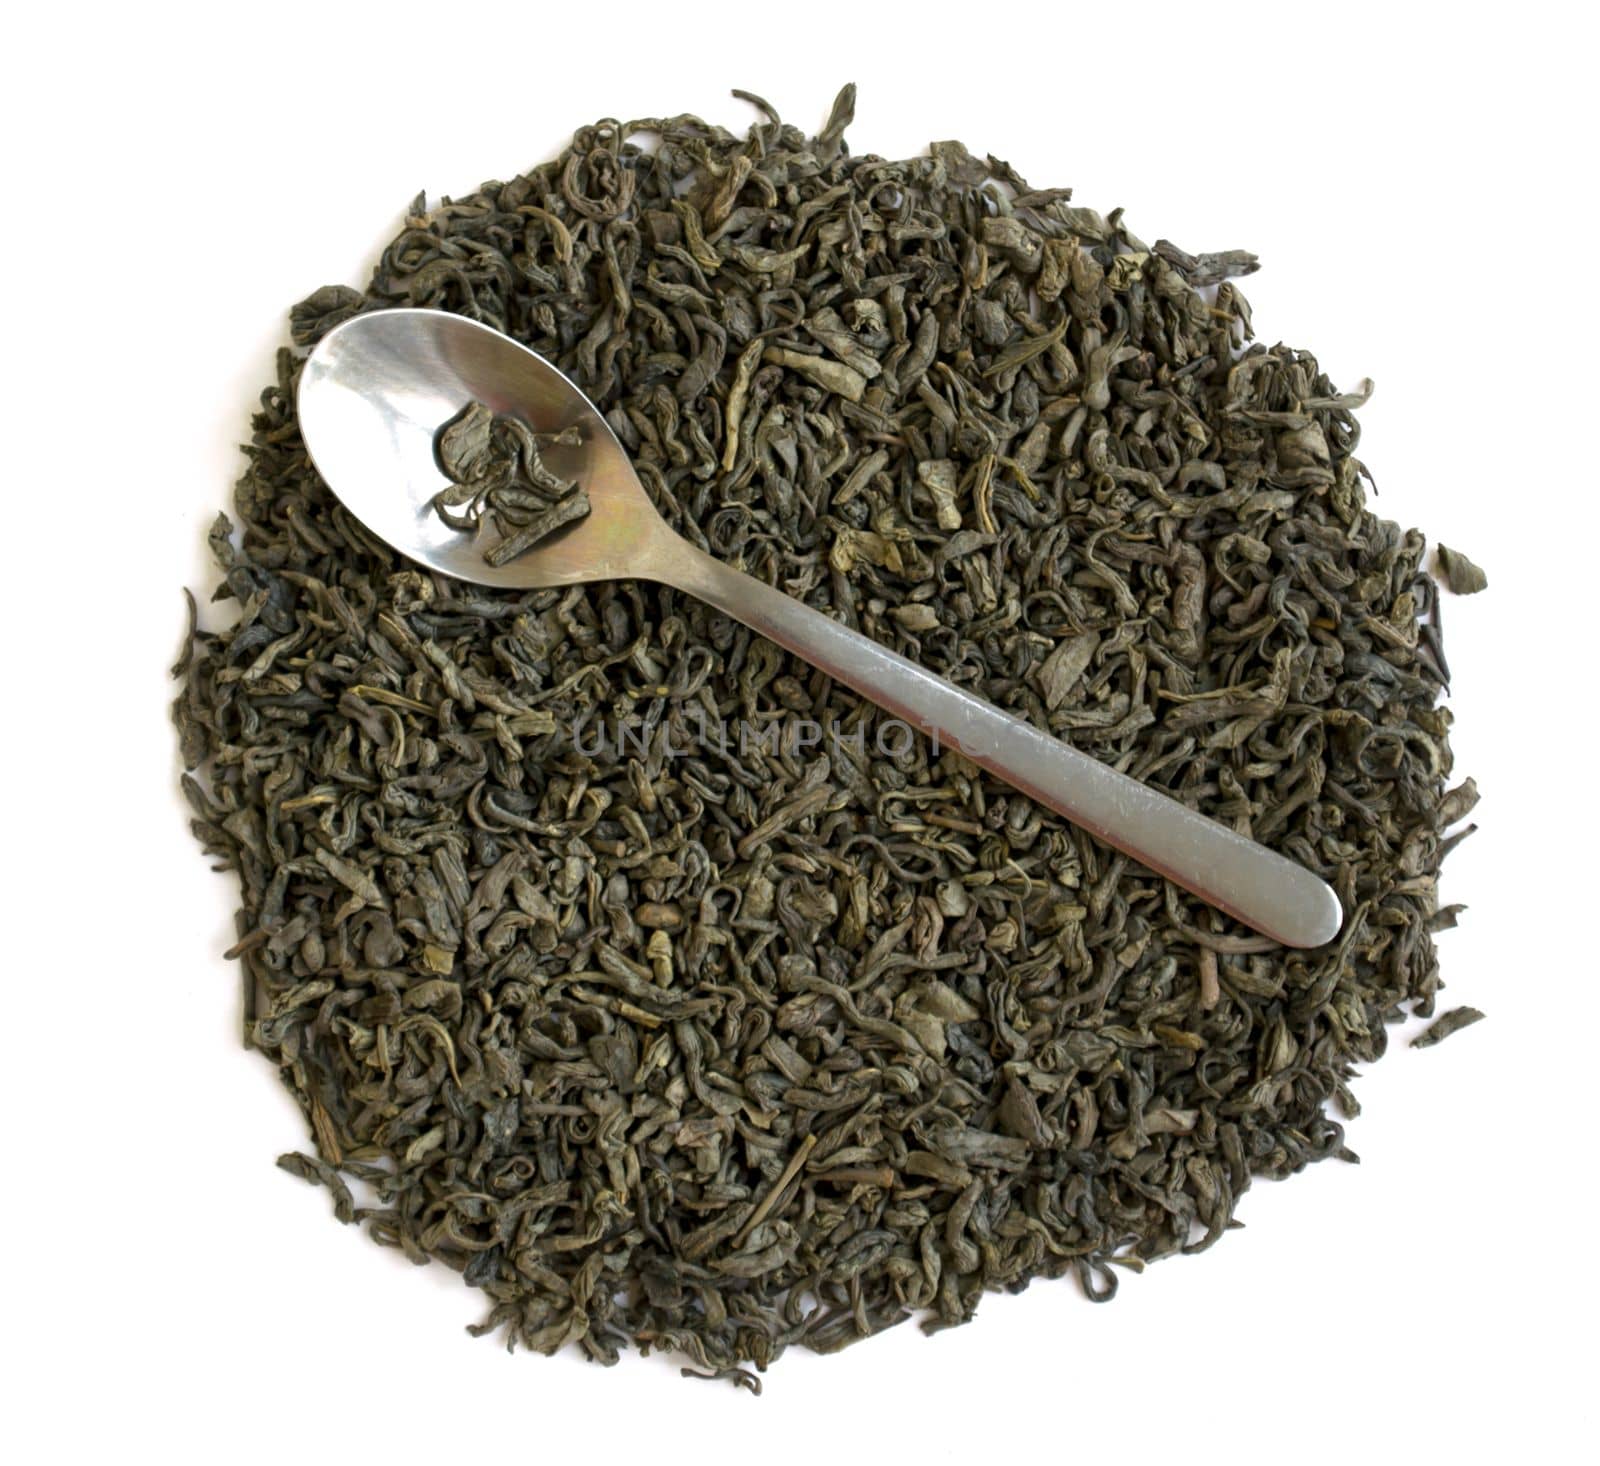 Dried green leaf tea. Green leaf tea and a spoon on a white background close-up.